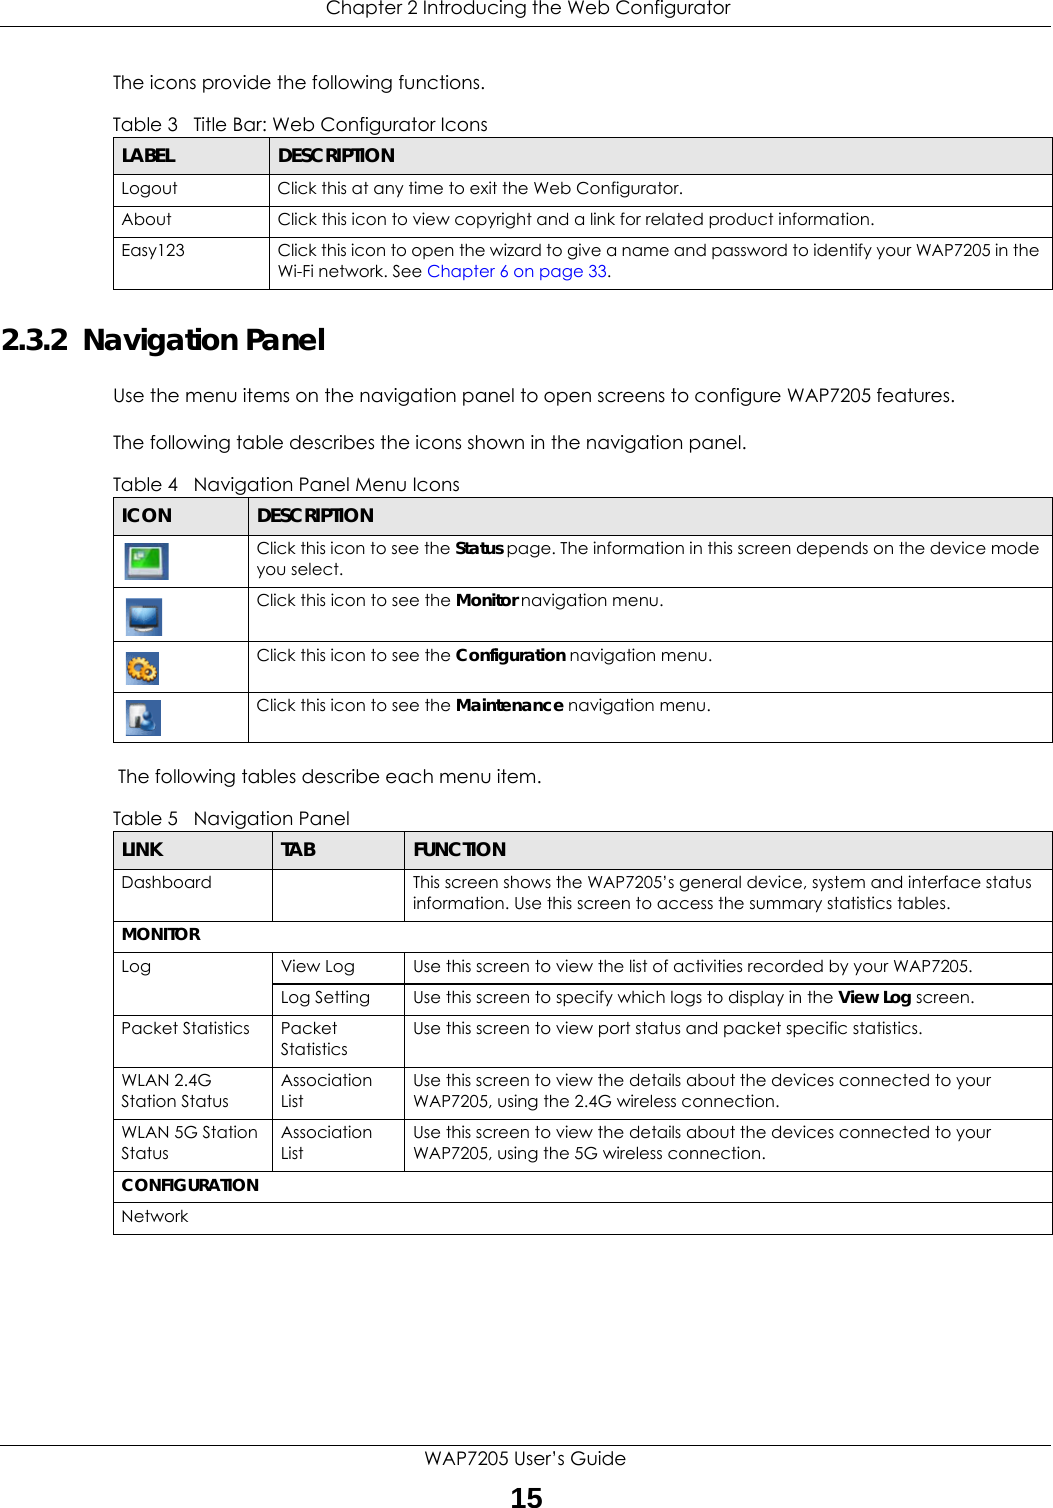  Chapter 2 Introducing the Web ConfiguratorWAP7205 User’s Guide15The icons provide the following functions. 2.3.2  Navigation PanelUse the menu items on the navigation panel to open screens to configure WAP7205 features.The following table describes the icons shown in the navigation panel. The following tables describe each menu item.   Table 3   Title Bar: Web Configurator IconsLABEL DESCRIPTIONLogout Click this at any time to exit the Web Configurator.About Click this icon to view copyright and a link for related product information.Easy123 Click this icon to open the wizard to give a name and password to identify your WAP7205 in the Wi-Fi network. See Chapter 6 on page 33.Table 4   Navigation Panel Menu IconsICON DESCRIPTIONClick this icon to see the Status page. The information in this screen depends on the device mode you select.Click this icon to see the Monitor navigation menu.Click this icon to see the Configuration navigation menu.Click this icon to see the Maintenance navigation menu.Table 5   Navigation PanelLINK TAB FUNCTIONDashboard This screen shows the WAP7205’s general device, system and interface status information. Use this screen to access the summary statistics tables.MONITORLog View Log Use this screen to view the list of activities recorded by your WAP7205.Log Setting Use this screen to specify which logs to display in the View Log screen.Packet Statistics Packet StatisticsUse this screen to view port status and packet specific statistics.WLAN 2.4G Station StatusAssociation ListUse this screen to view the details about the devices connected to your WAP7205, using the 2.4G wireless connection.WLAN 5G Station StatusAssociation ListUse this screen to view the details about the devices connected to your WAP7205, using the 5G wireless connection.CONFIGURATIONNetwork